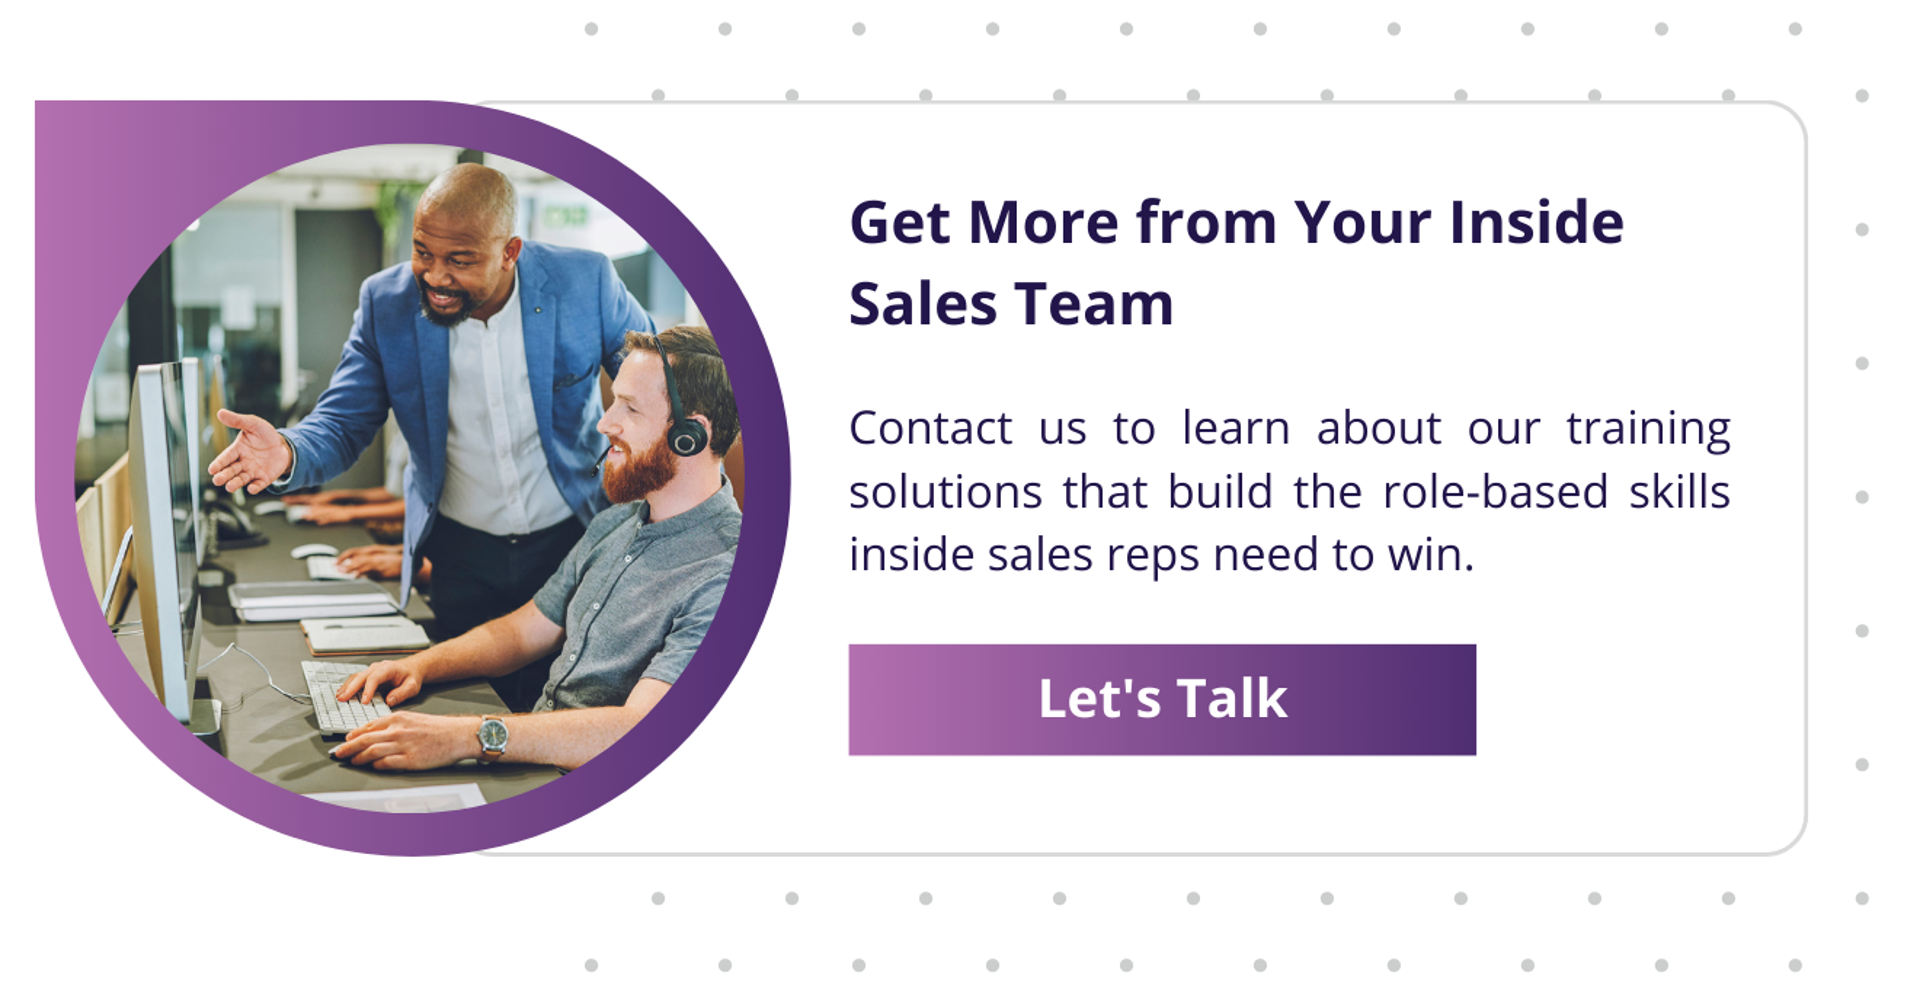 click here to contact richardson about inside sales training solutions